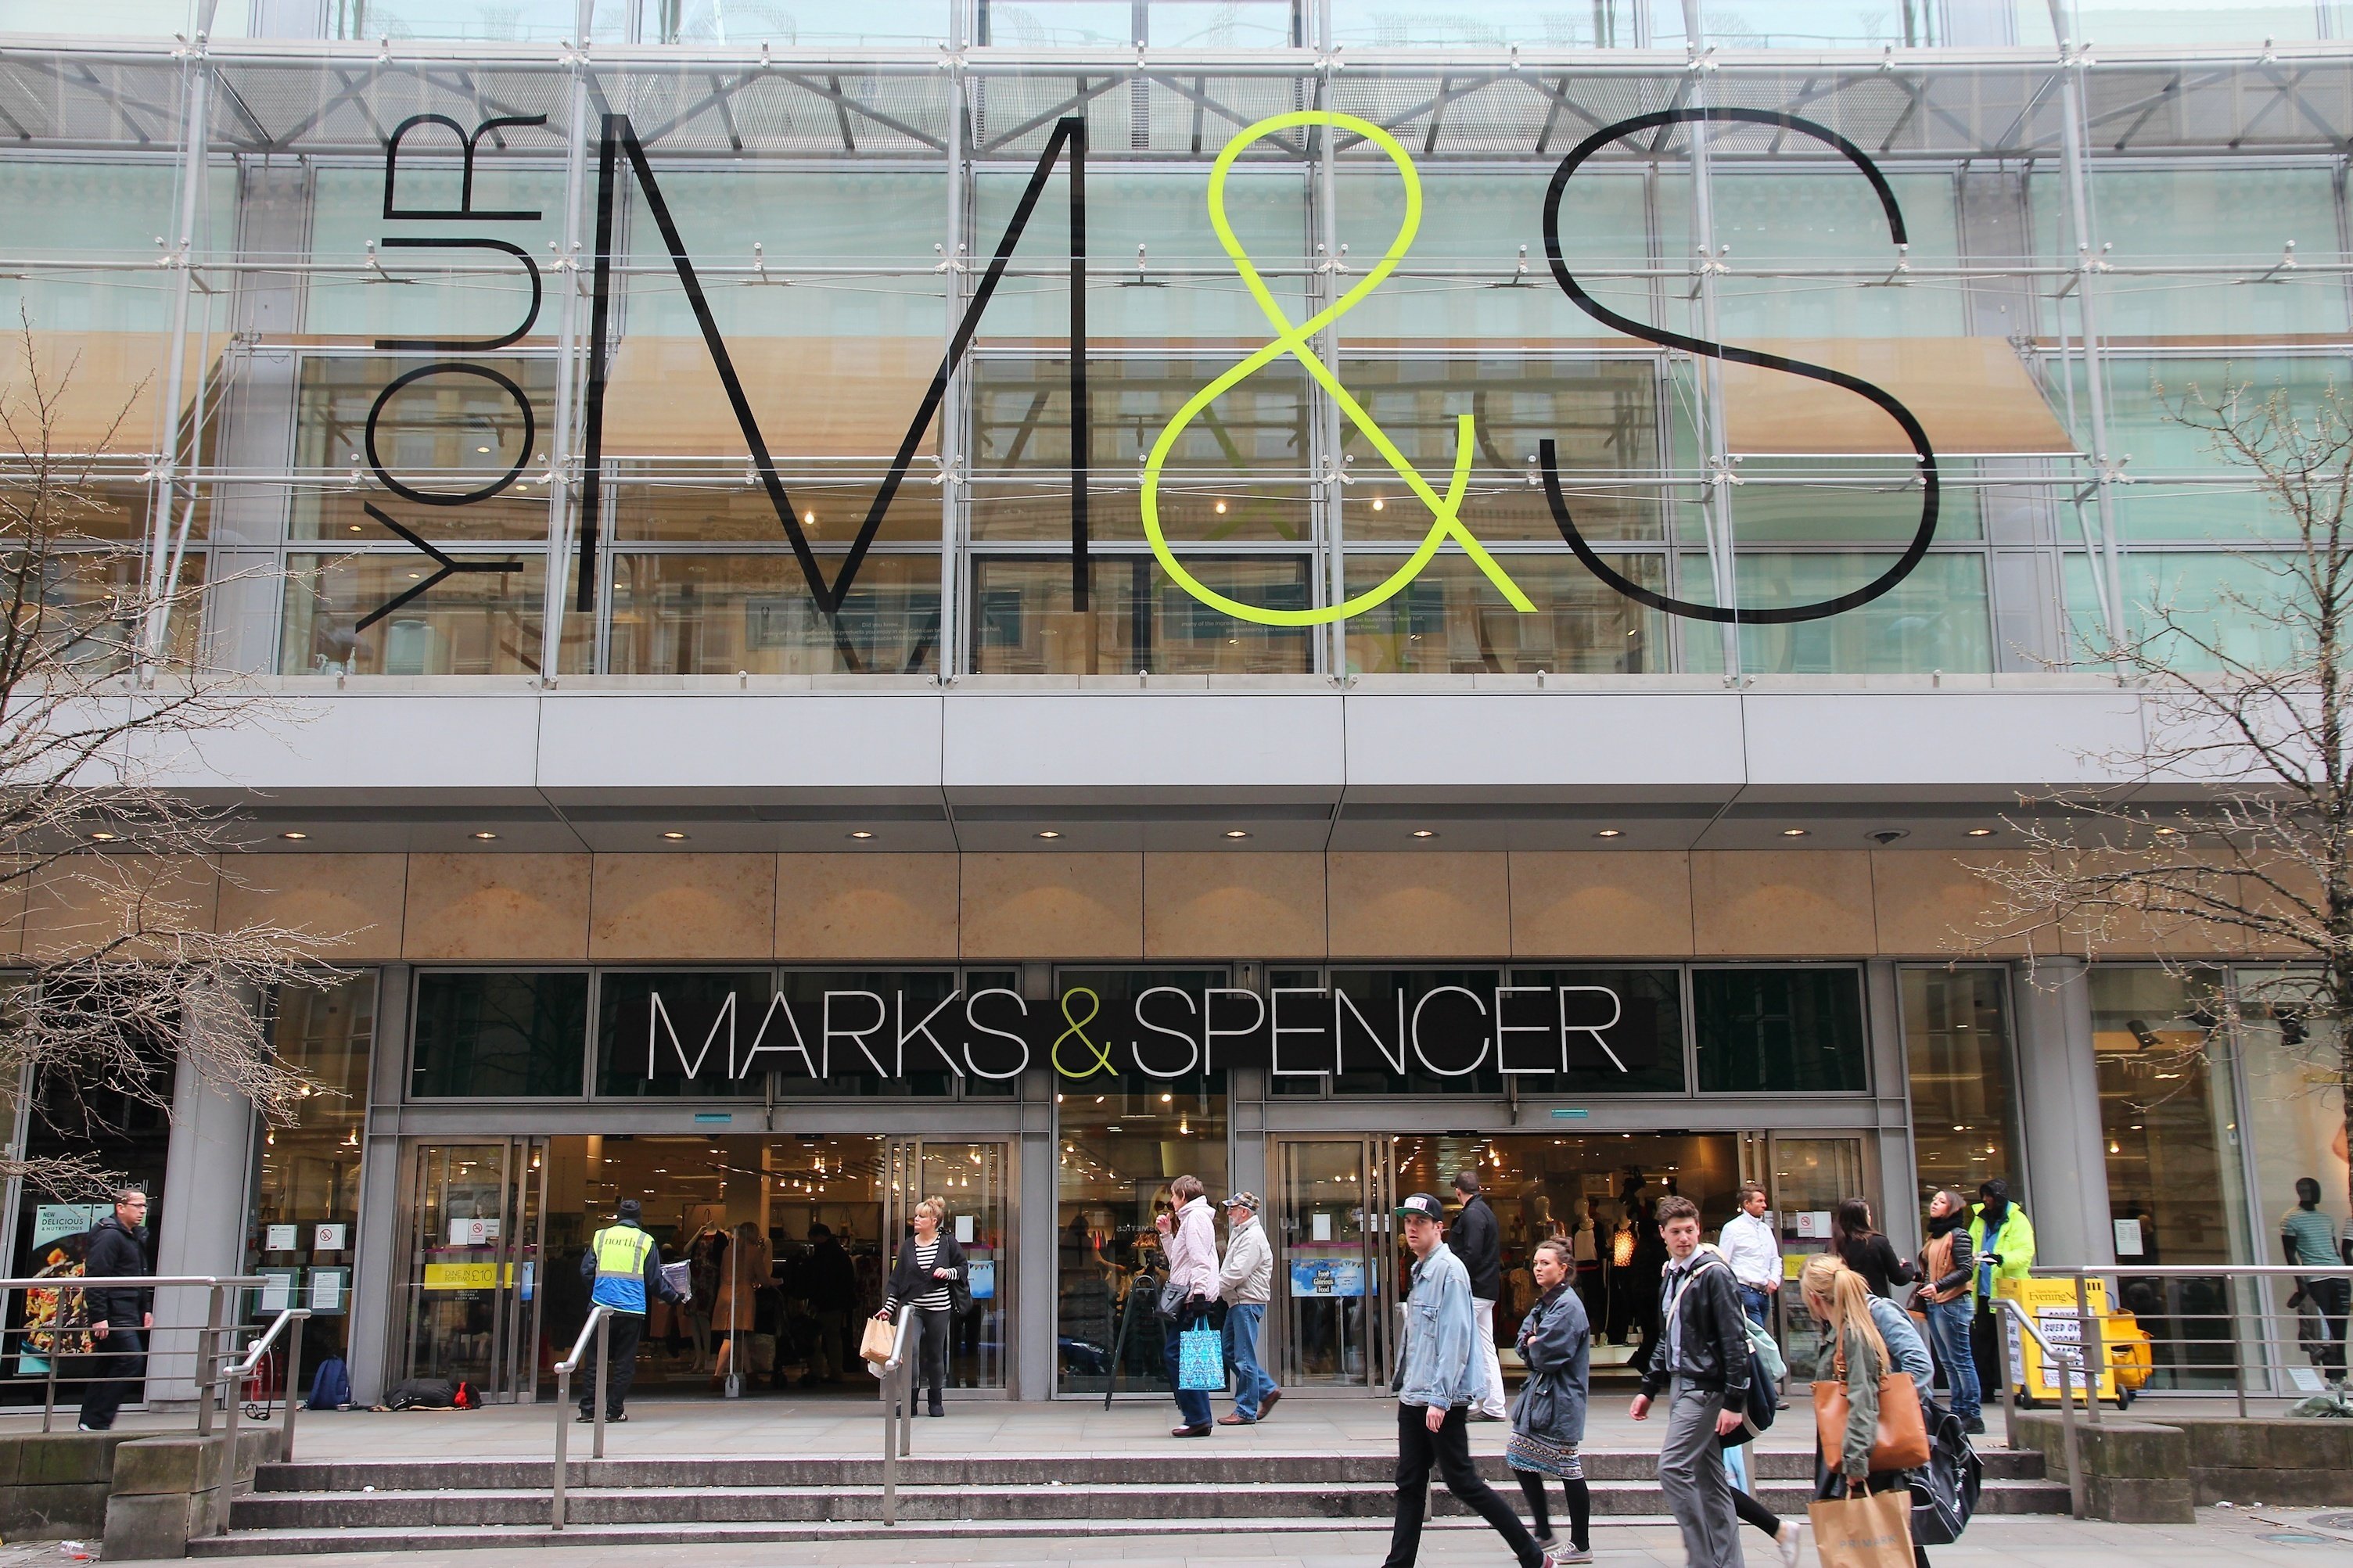 Can the New M&S Marketing Strategy Drive Stronger Conversation?